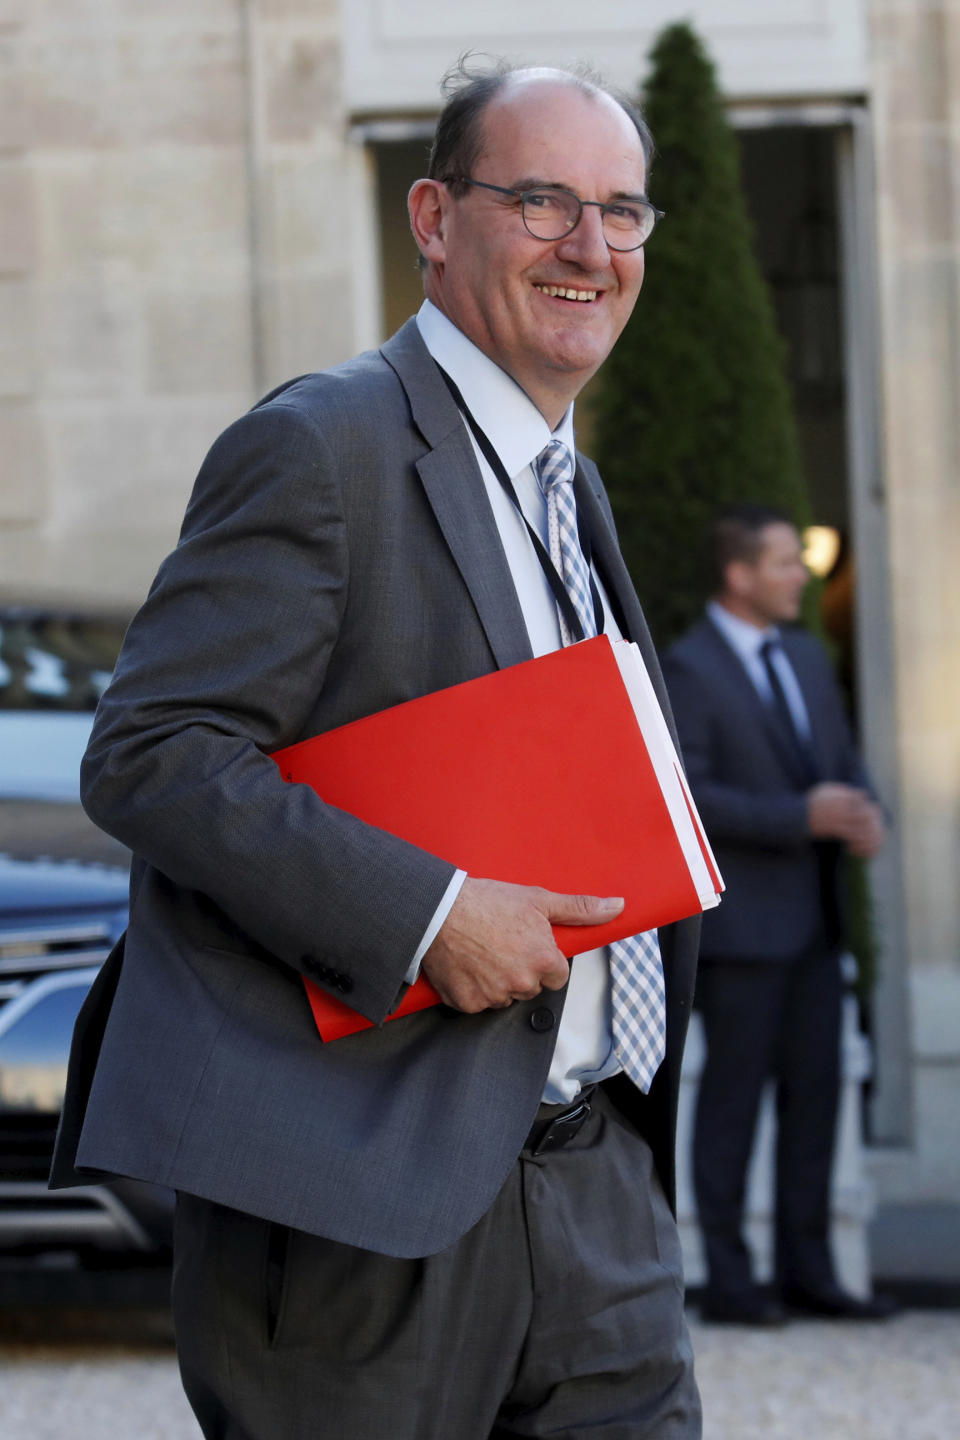 FILE - In this May 19, 2020 file photo, Jean Castex leaves after a videoconference with the French President and French mayors at the Elysee Palace in Paris. French President Emmanuel Macron has named Jean Castex, who coordinated France's virus reopening strategy, as new prime minister on Friday July 3, 2020. Emmanuel Macron is reshuffling the government to focus on reviving the economy after months of lockdown. (Gonzalo Fuentes/Pool via AP, File)